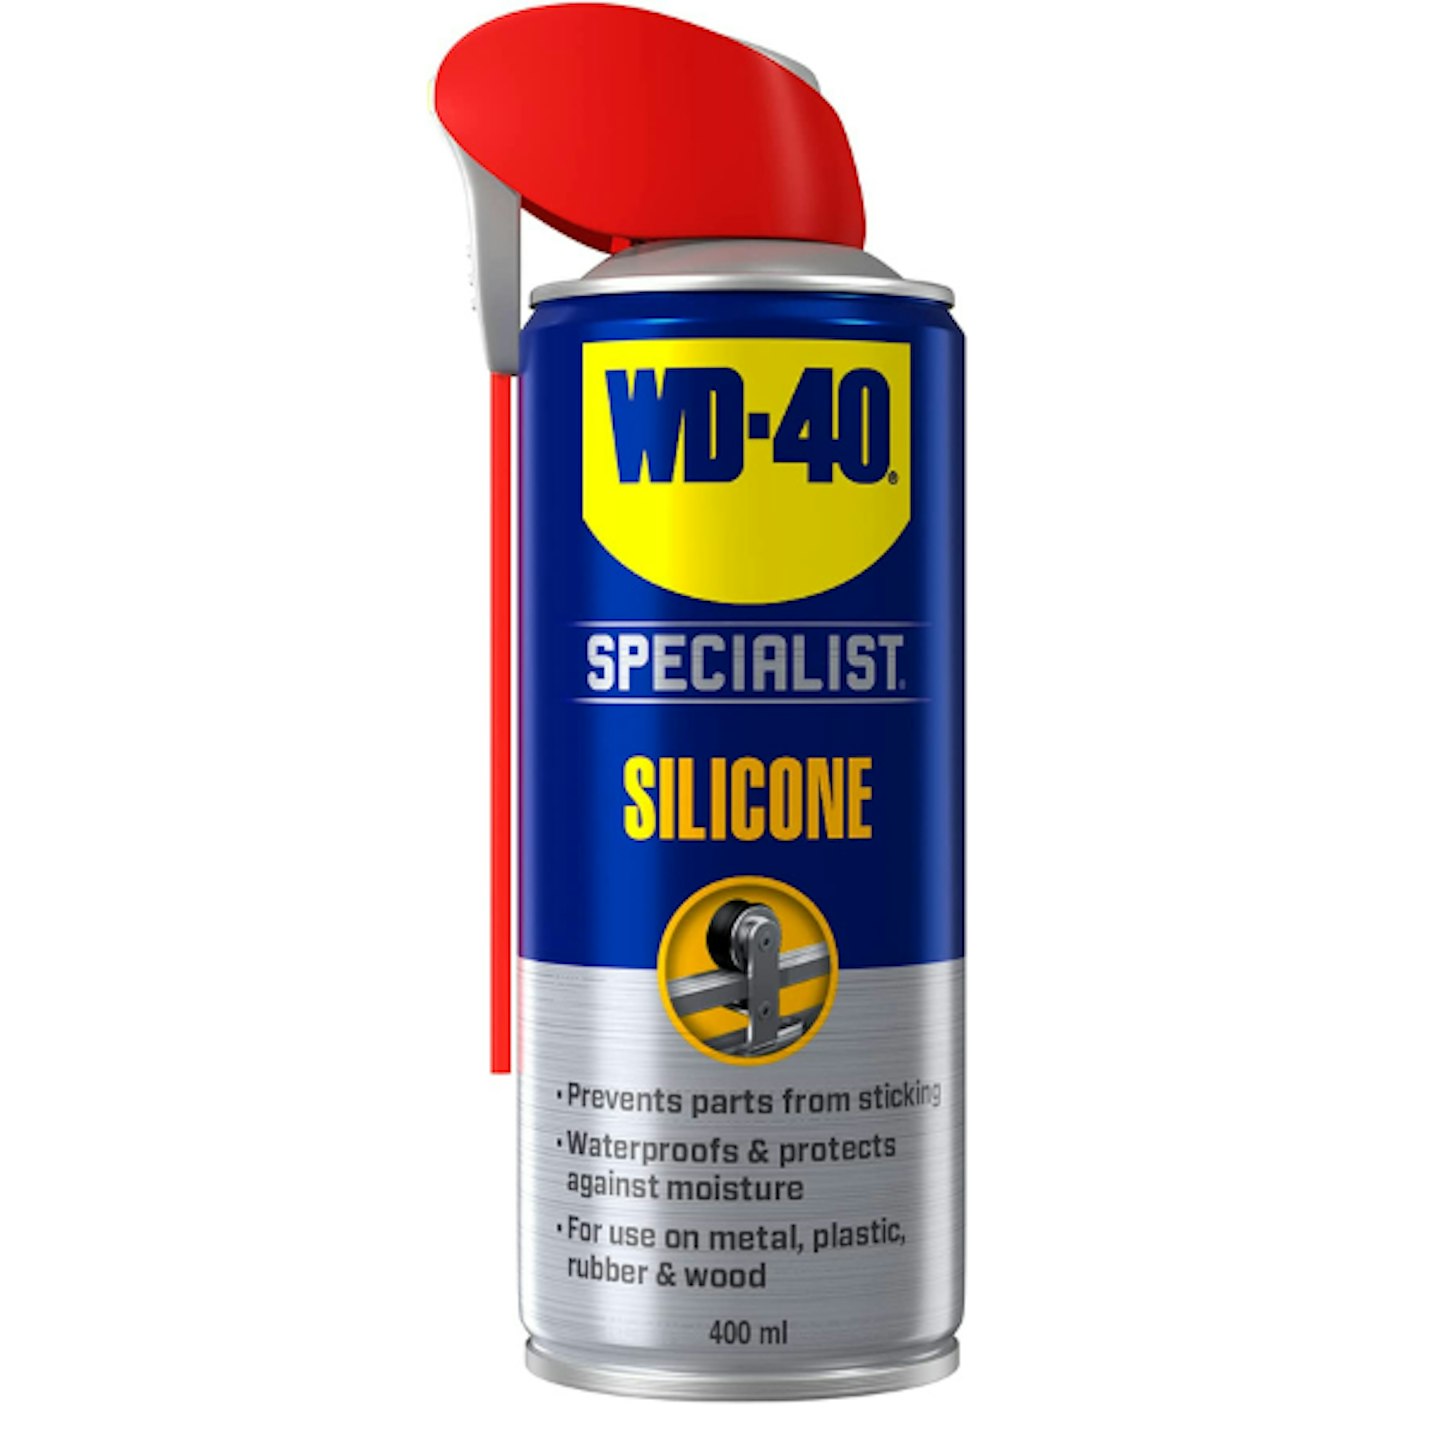 Silicone by WD-40 Specialist